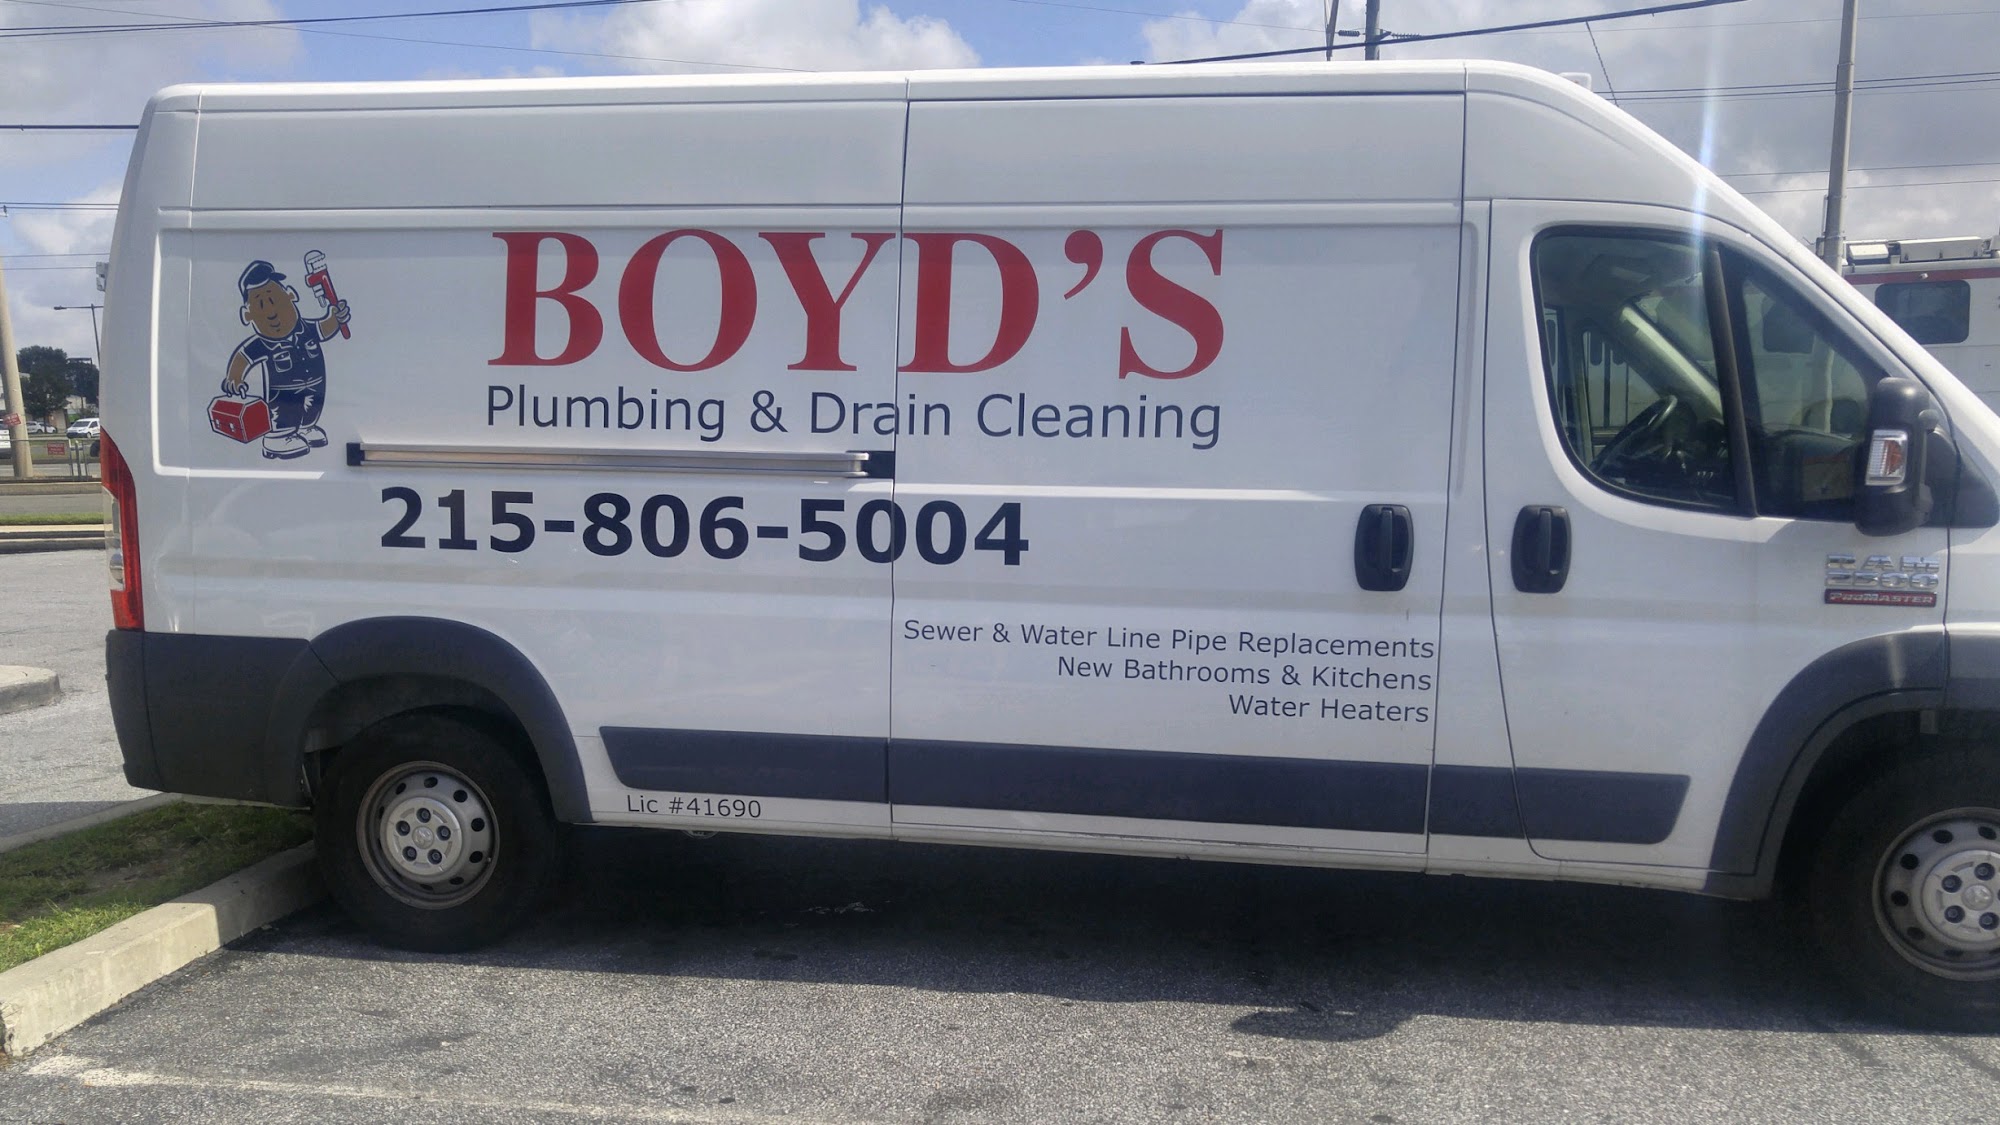 Boyd's Plumbing and Drain Cleaning